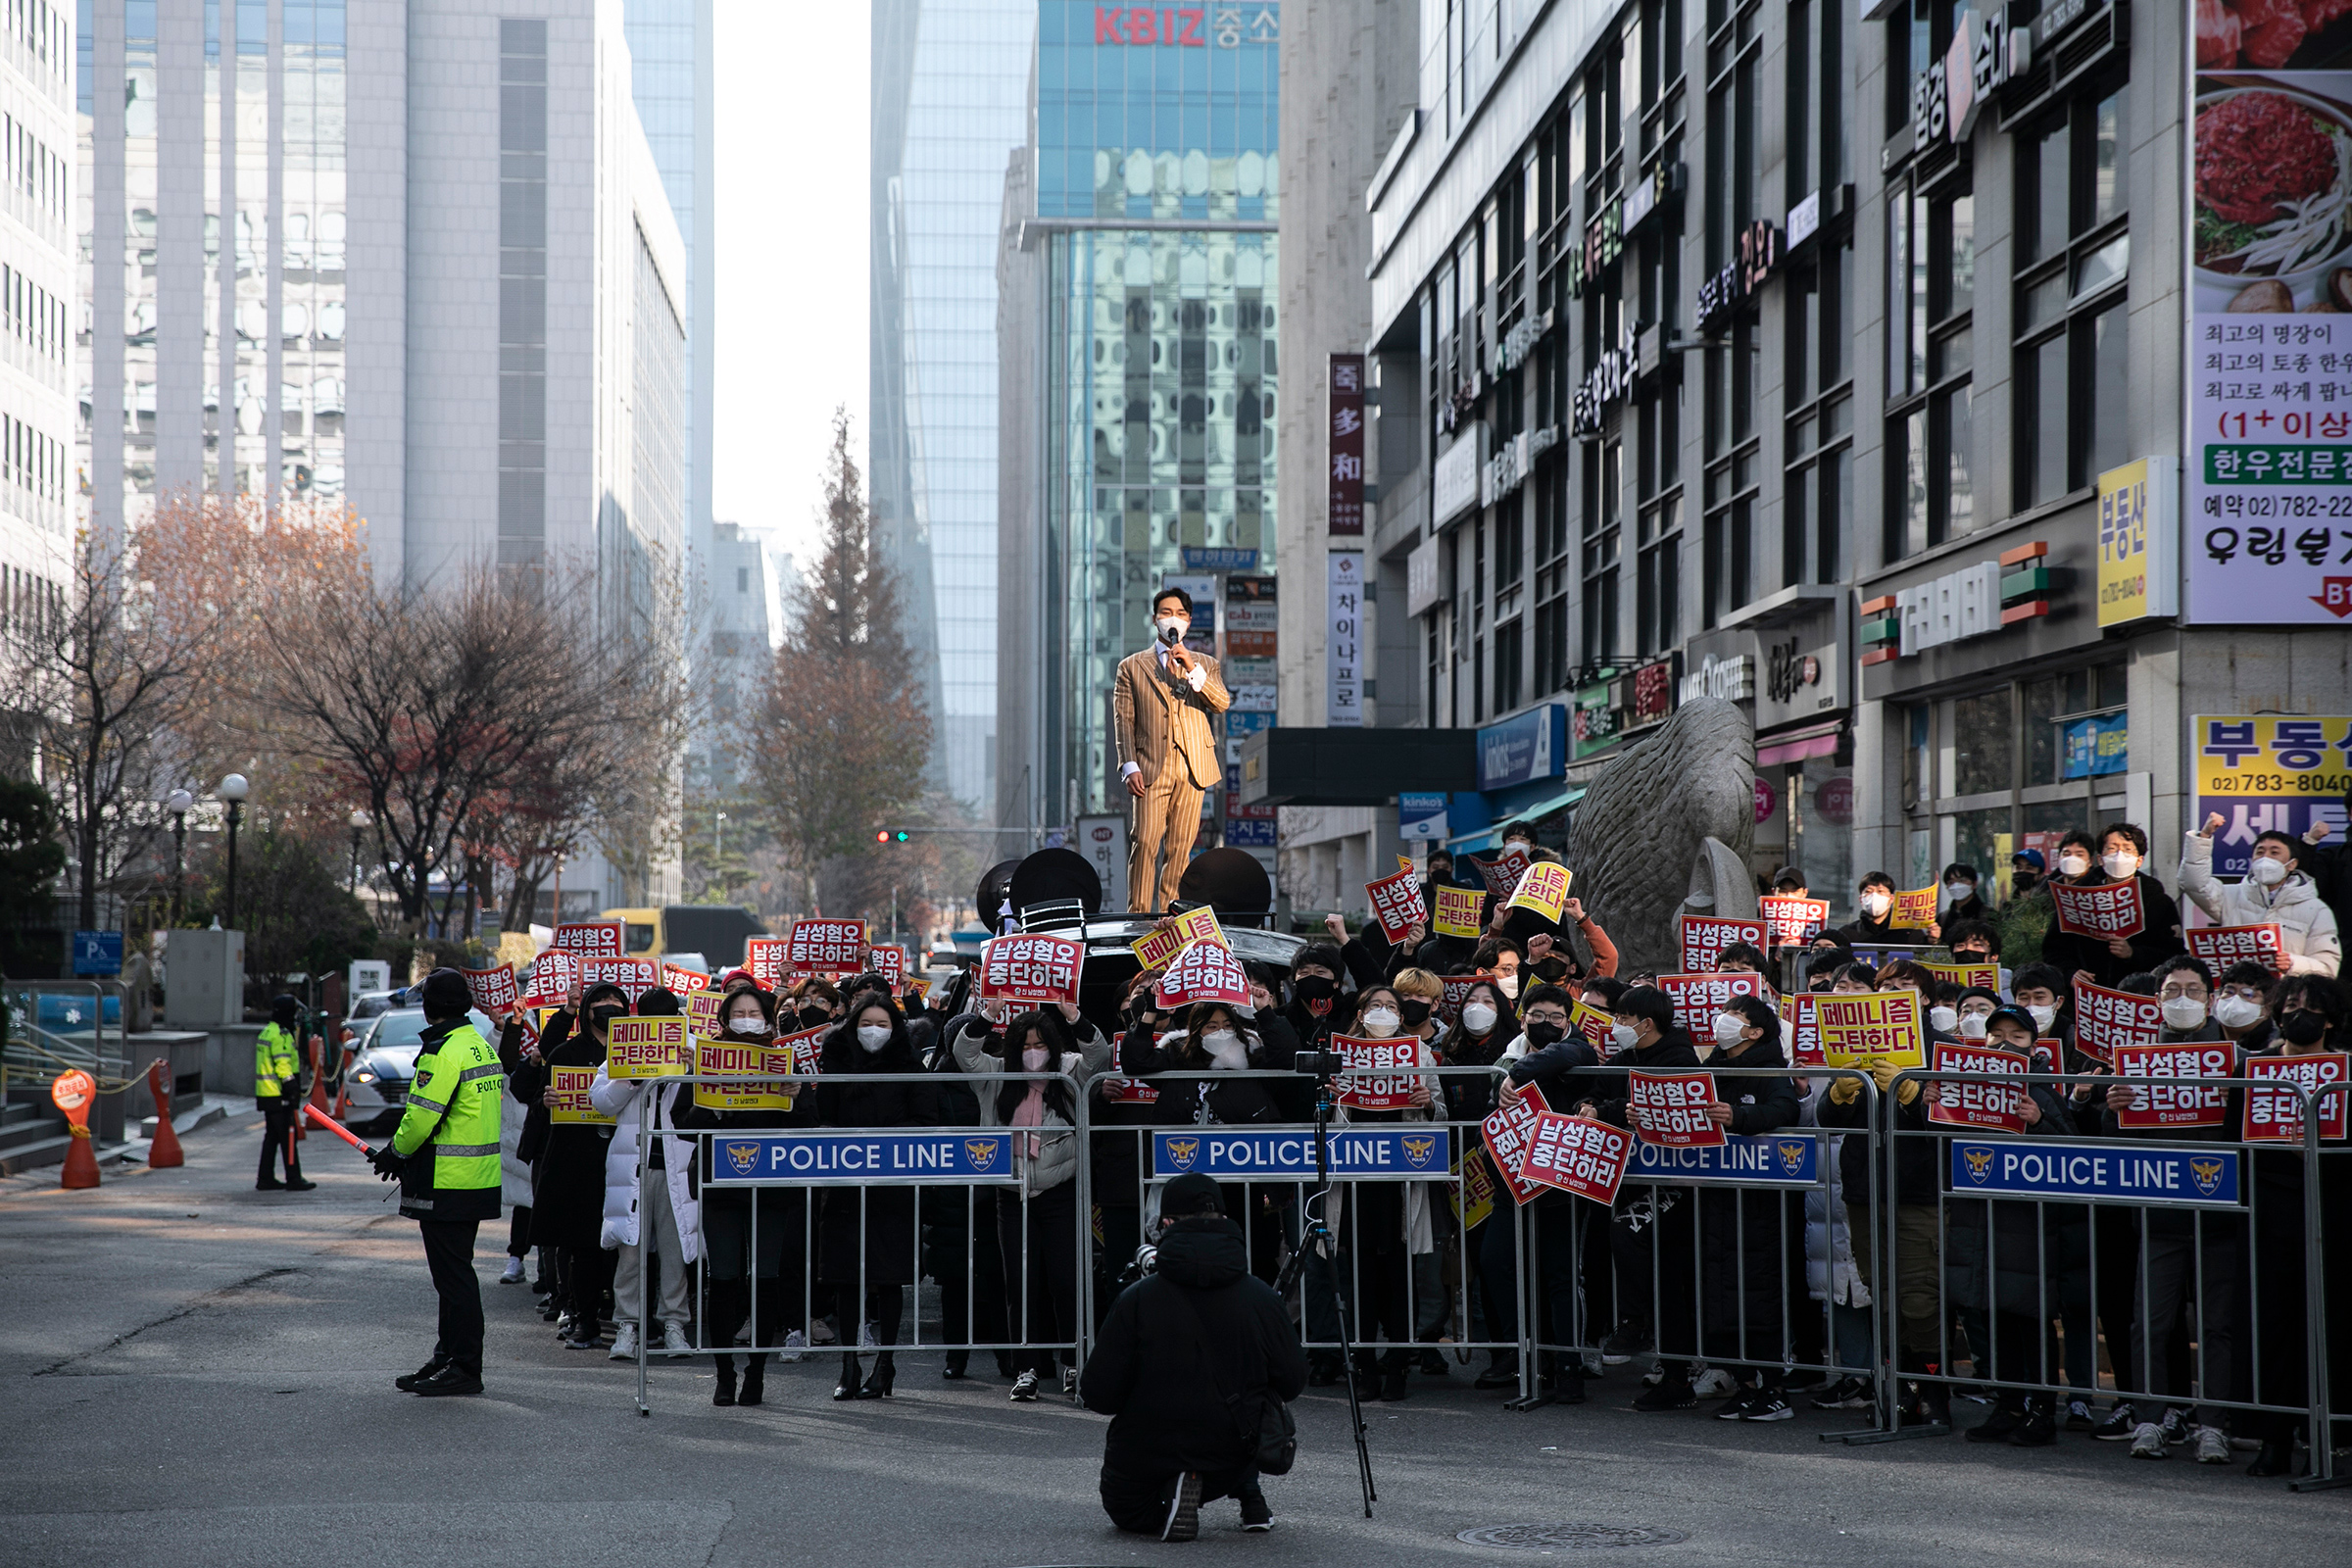 Bae In-kyu, head of "Man on Solidarity," one of South Korea's most active anti-feminist groups, leads a rally in Seoul in December 2021. "Feminists are a social evil," he has said. (Woohae Cho—The New York Times/Redux)